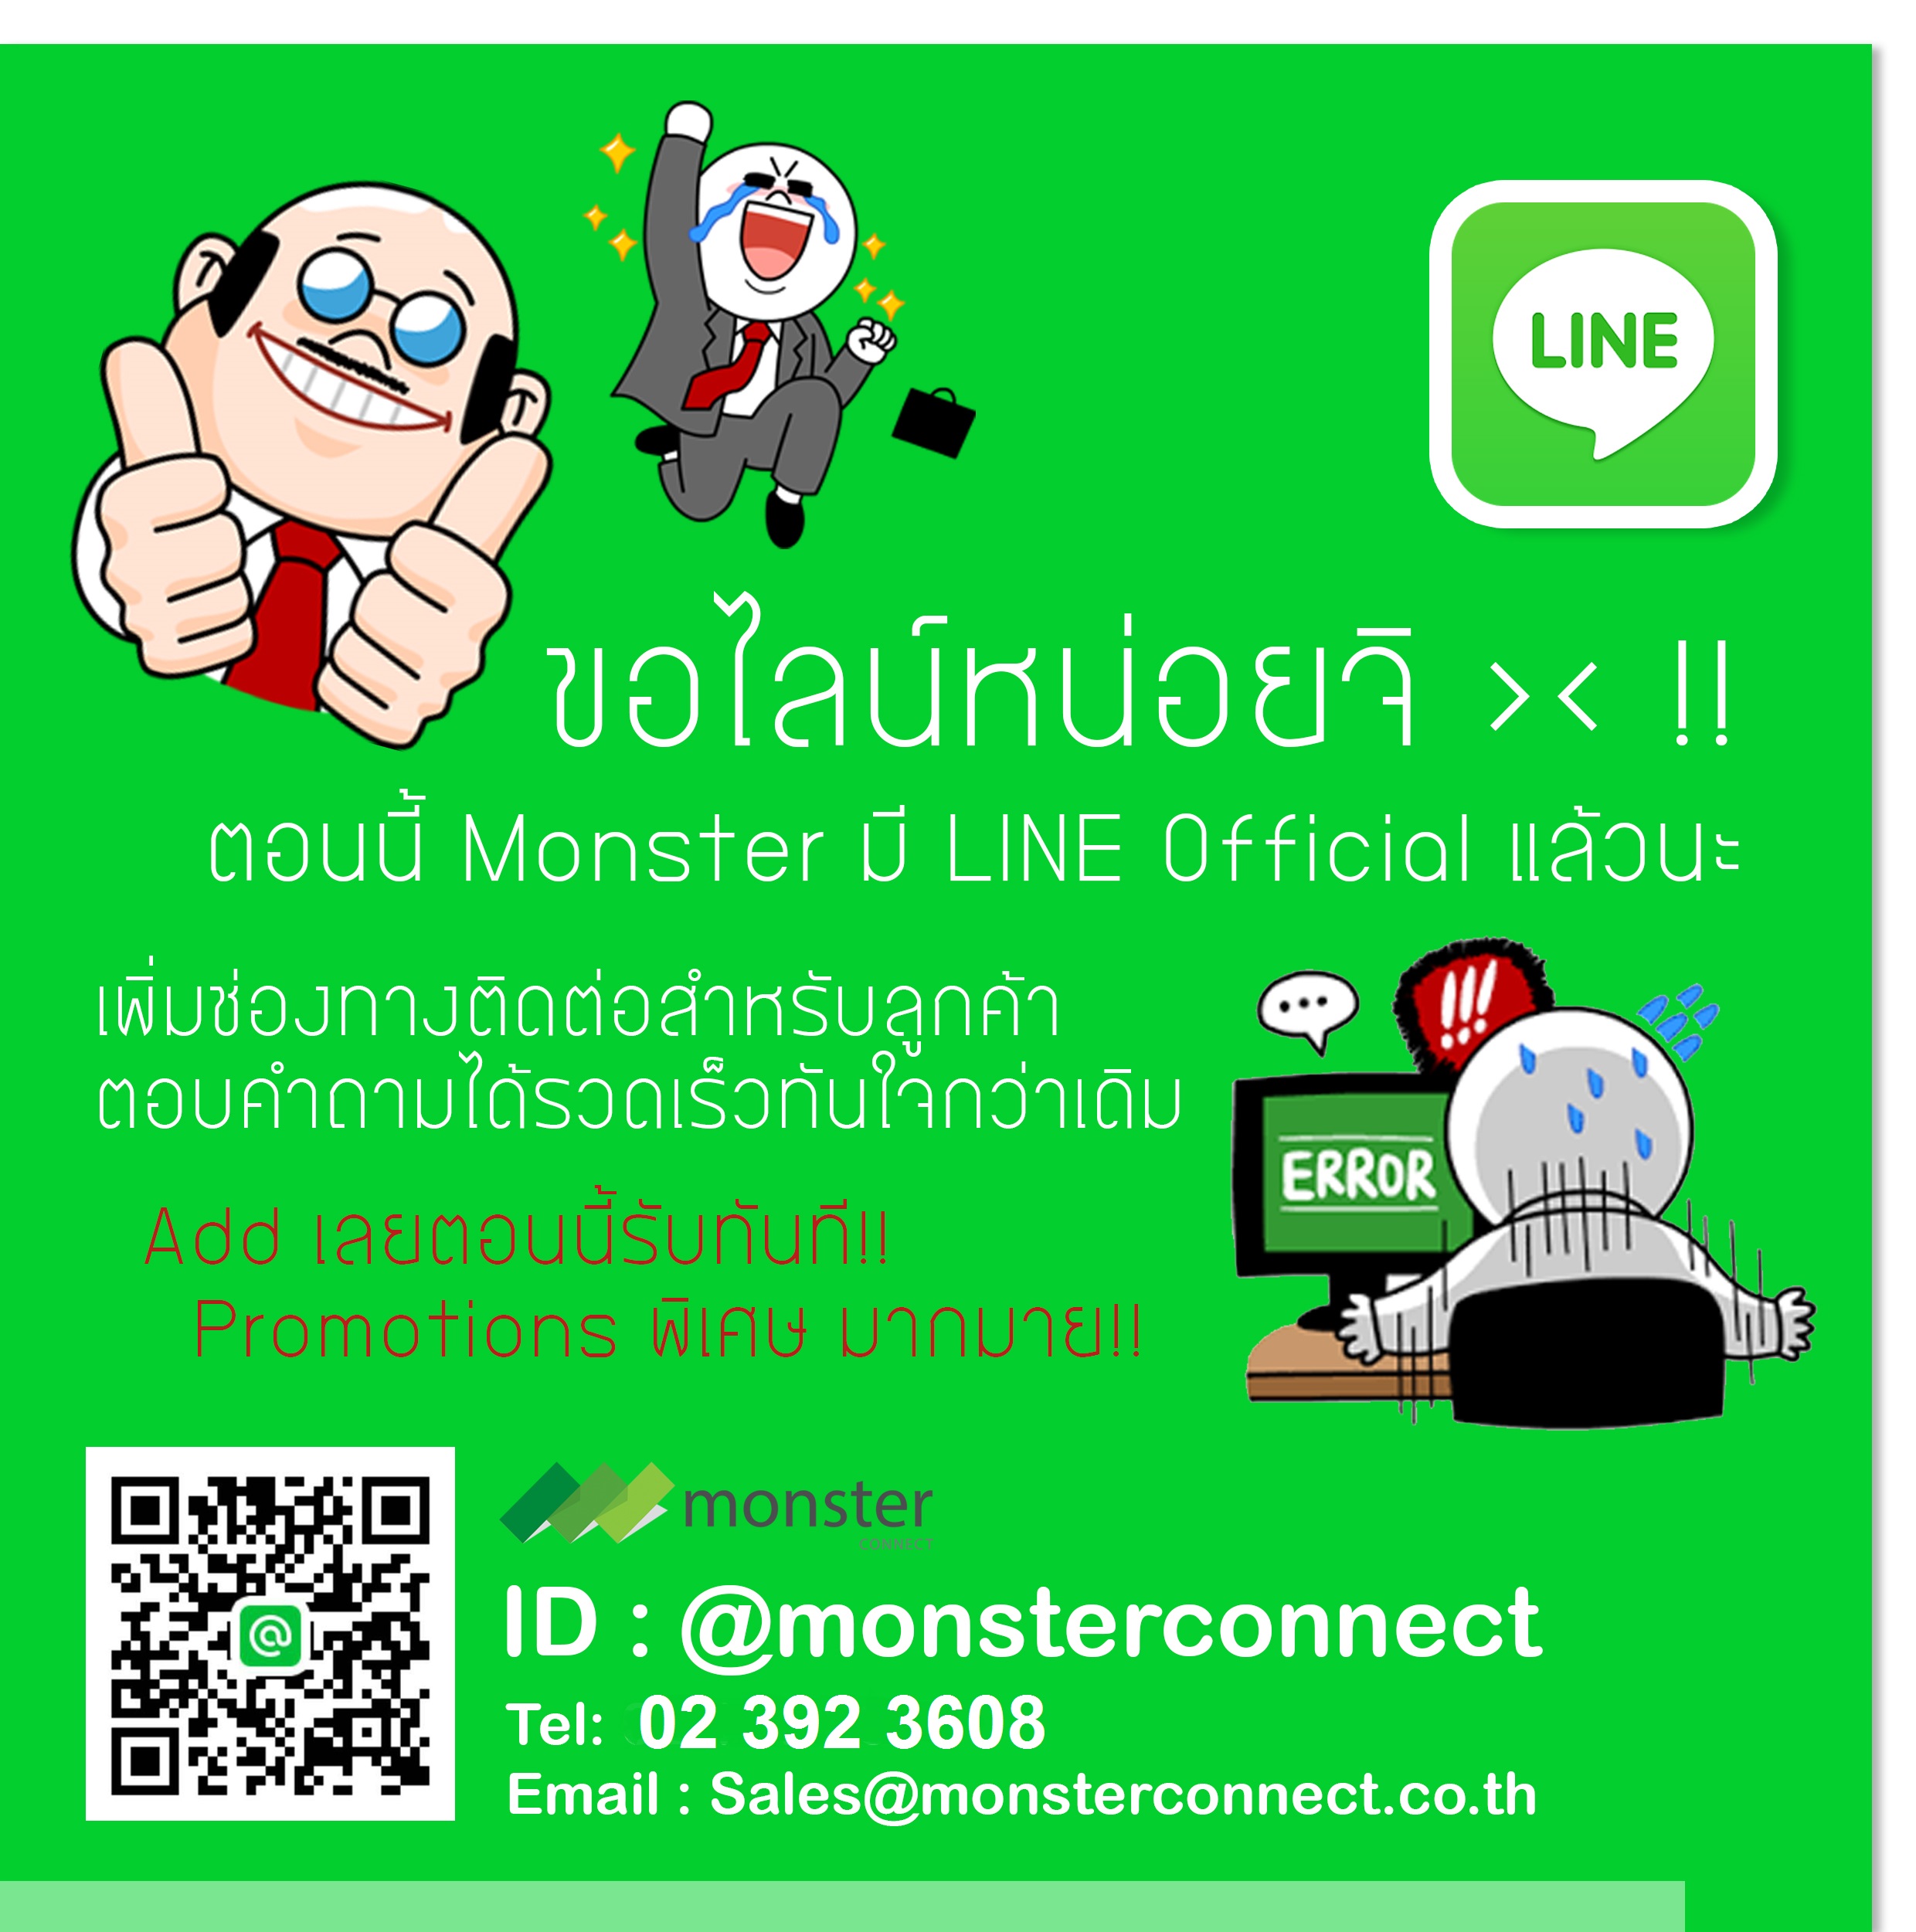 line @monsterconnect